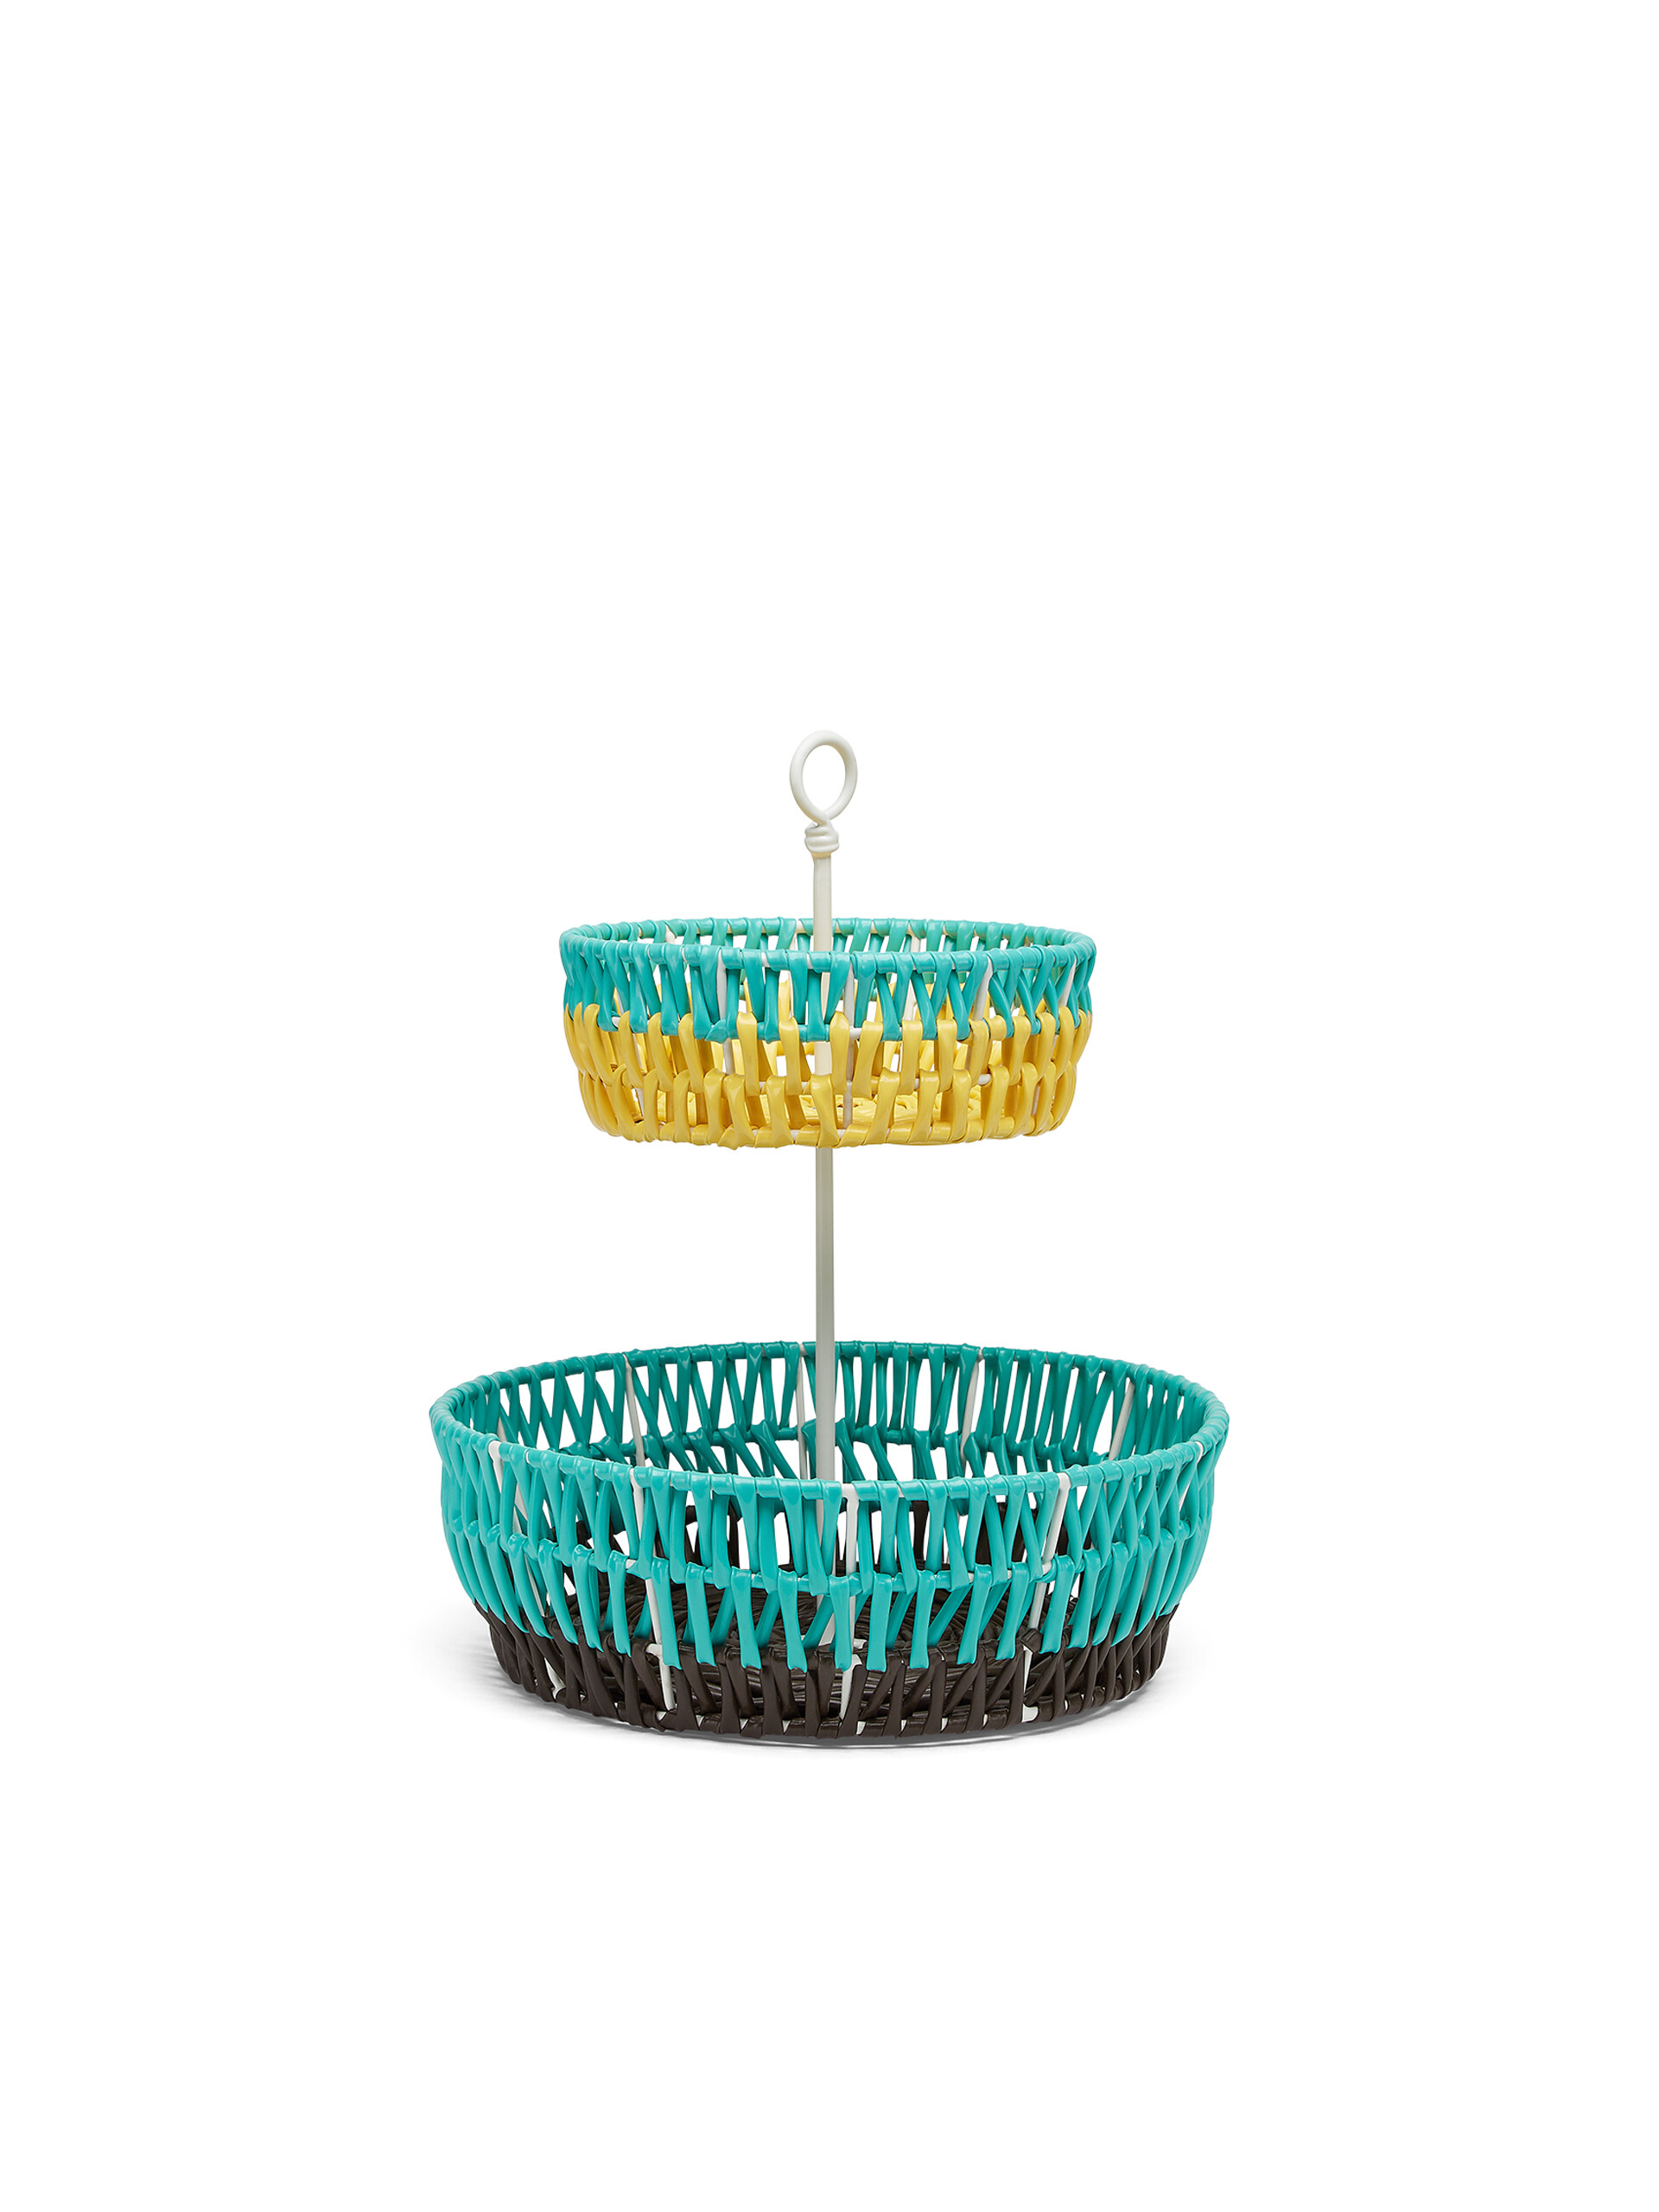 MARNI MARKET fruit stand with 2 fruit dishes in iron and turquoise, yellow and black PVC - Accessories - Image 2